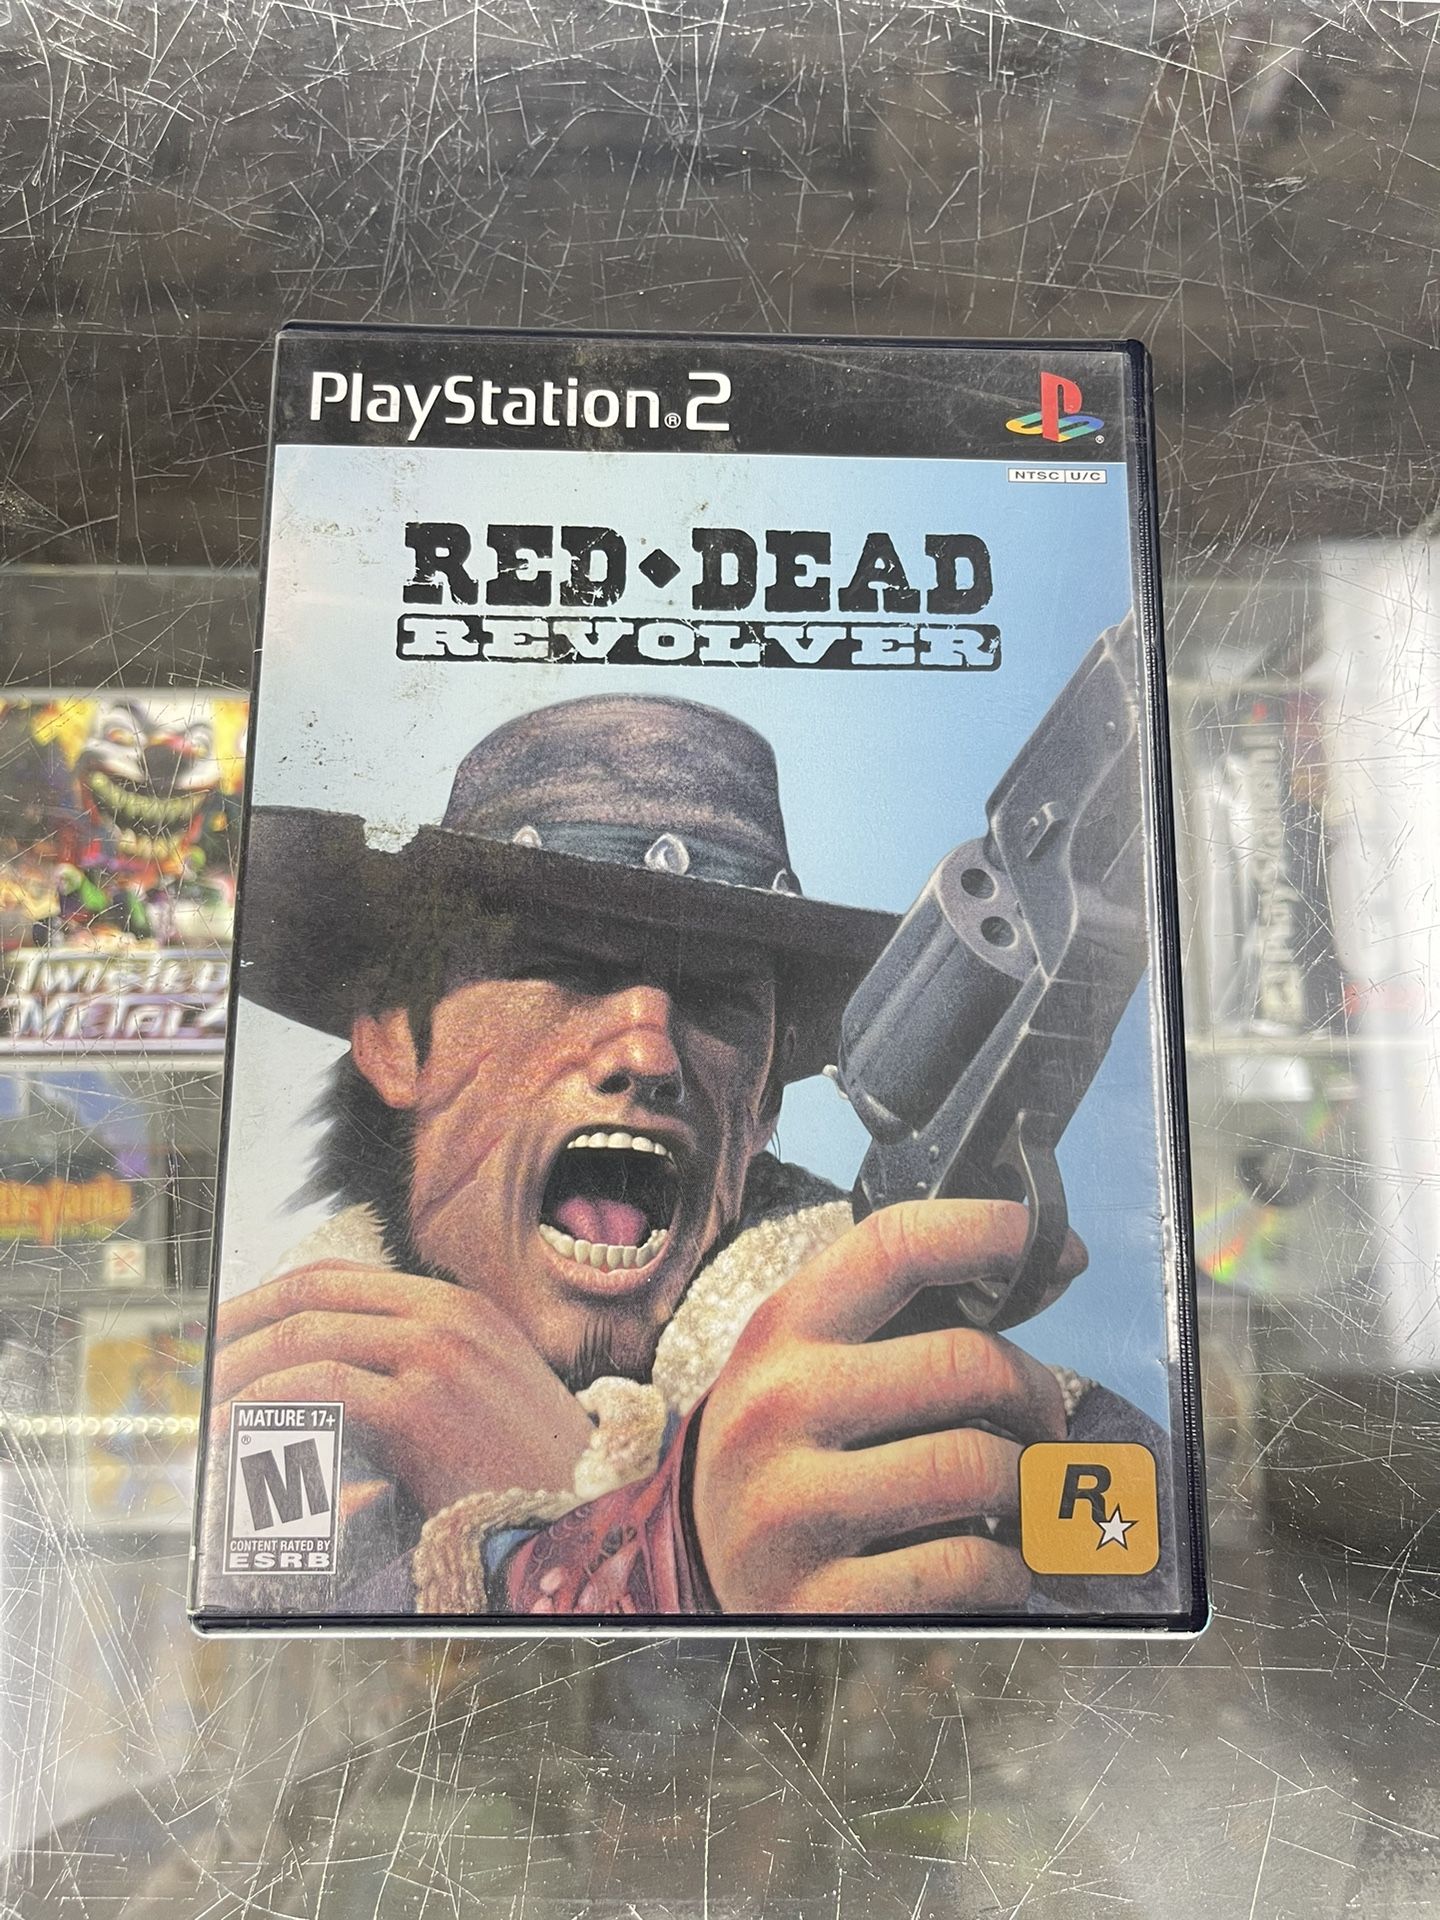 Red Dead Revolver Ps2 $35 Gamehogs 11am-7pm